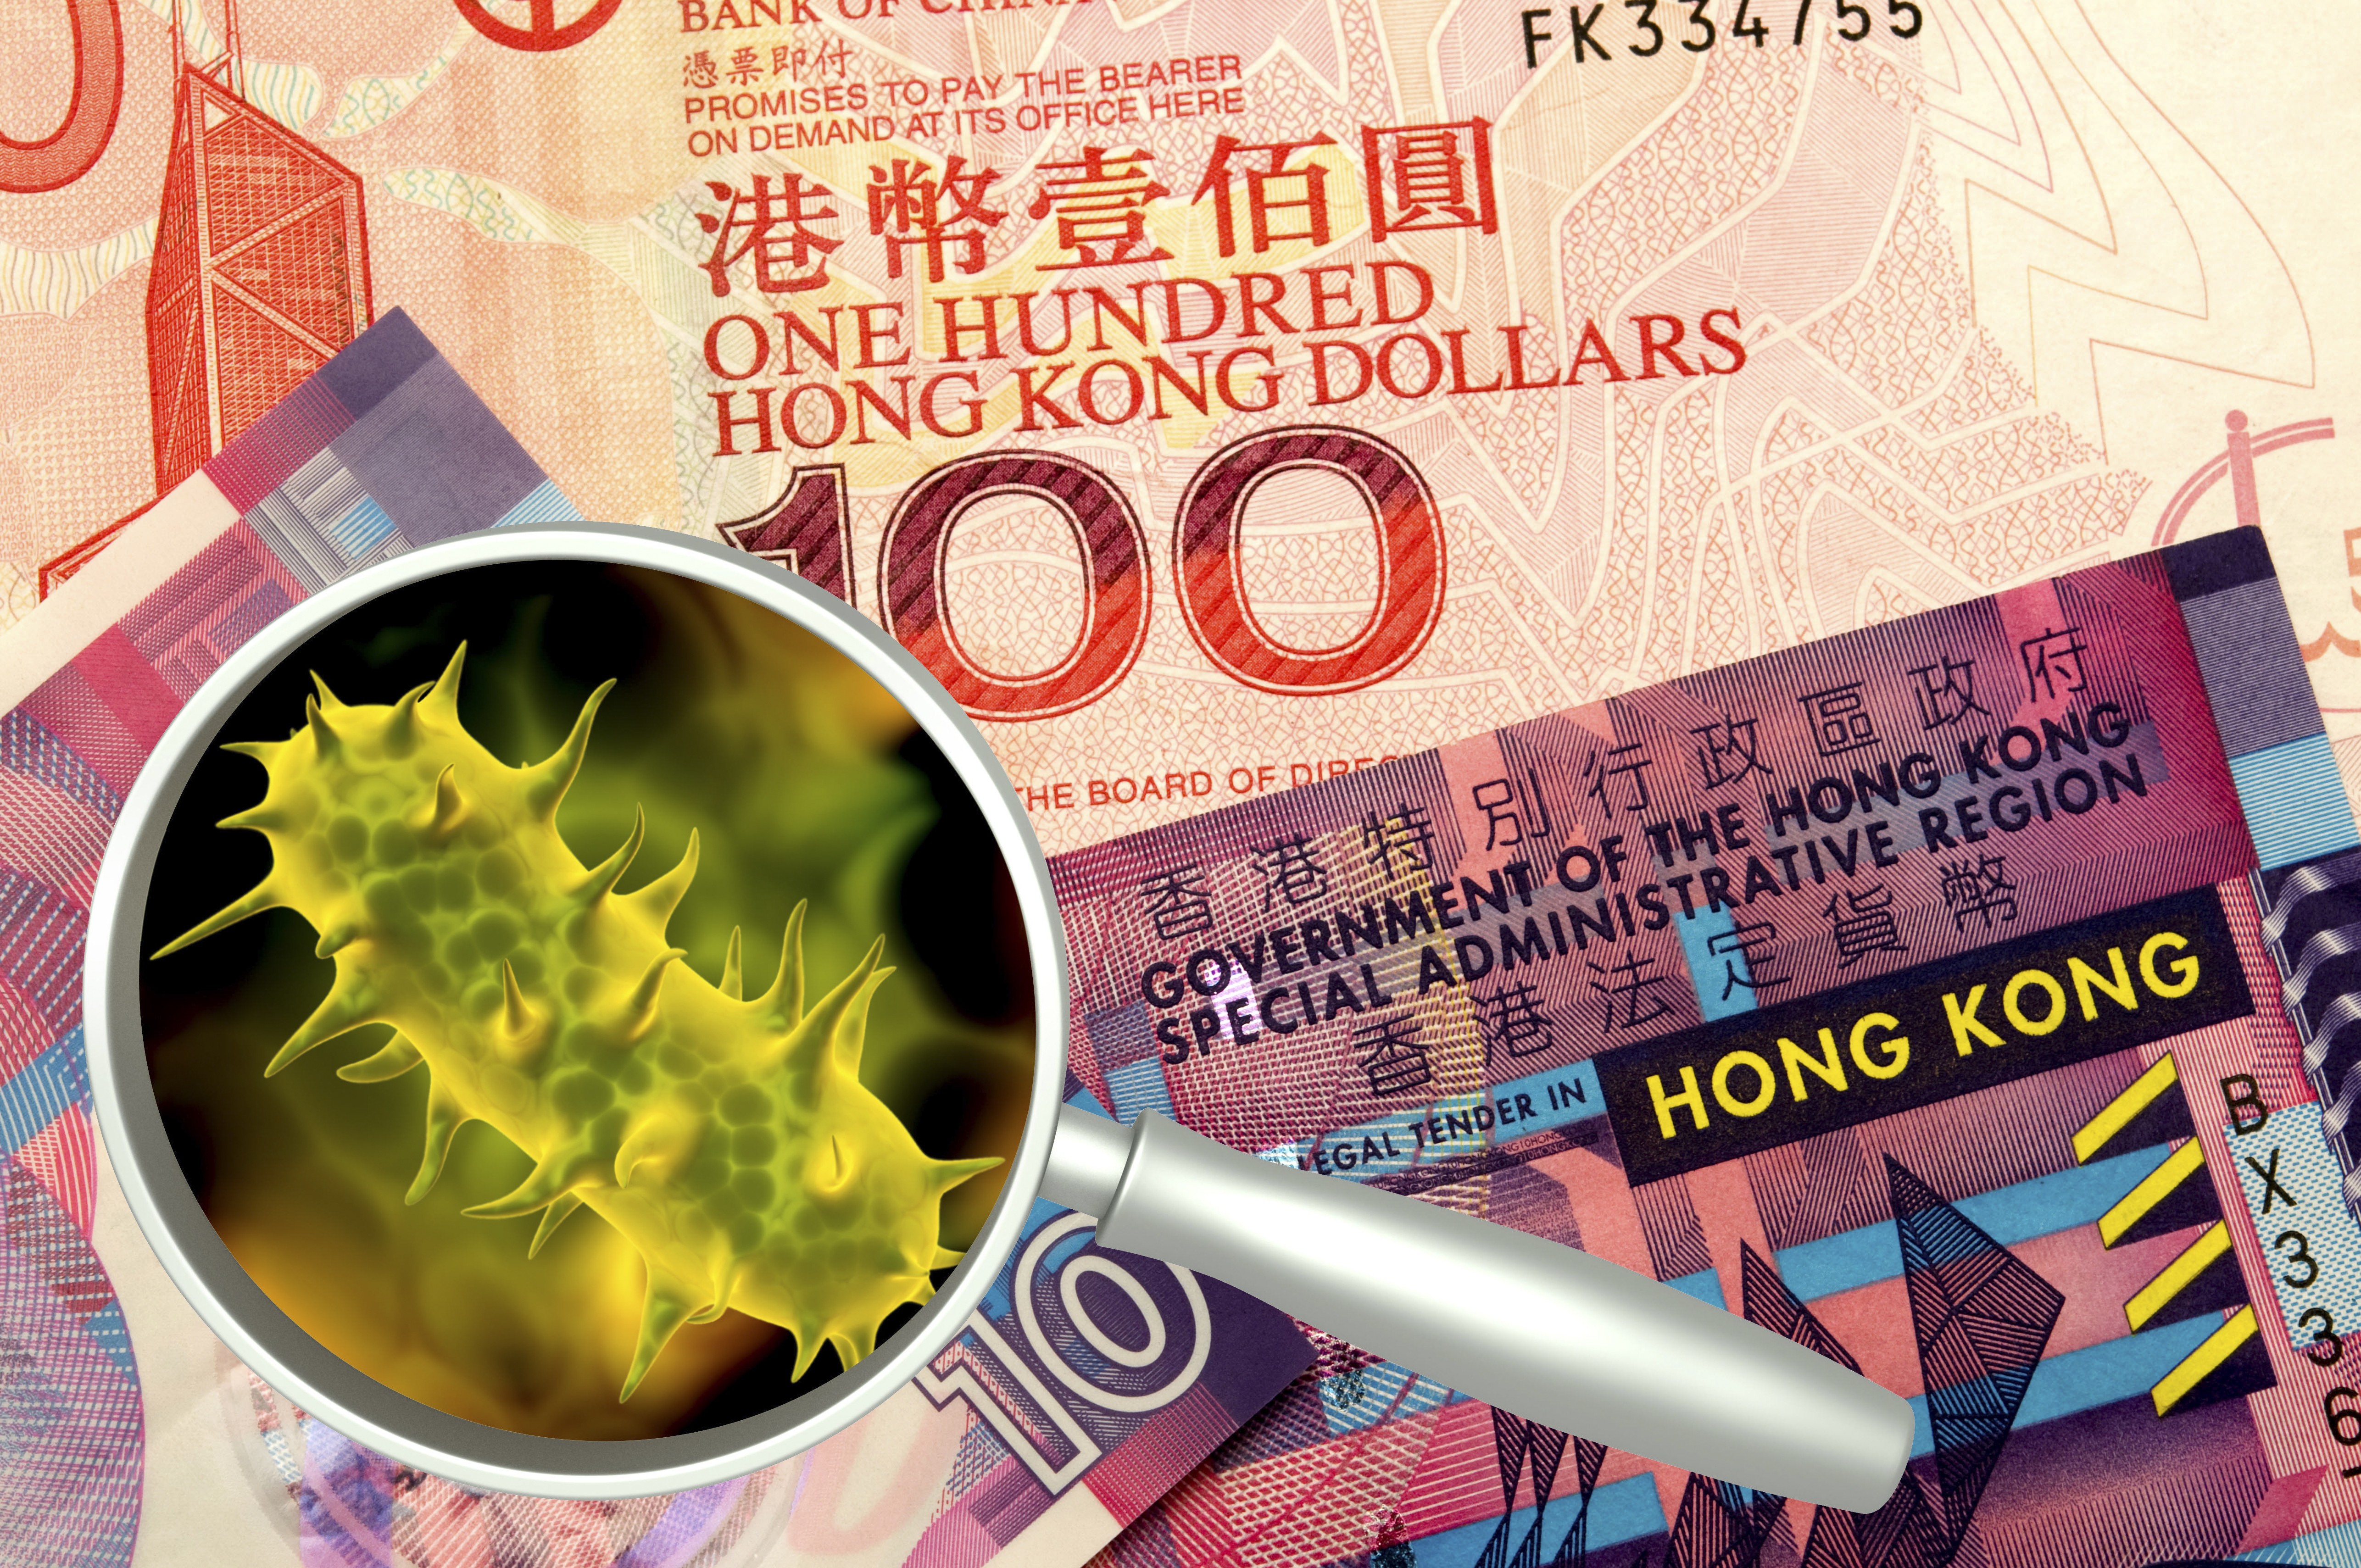 HK$20 bills have 48 times more antibiotic-resistant bacteria capable of being easily spread than samples collected elsewhere